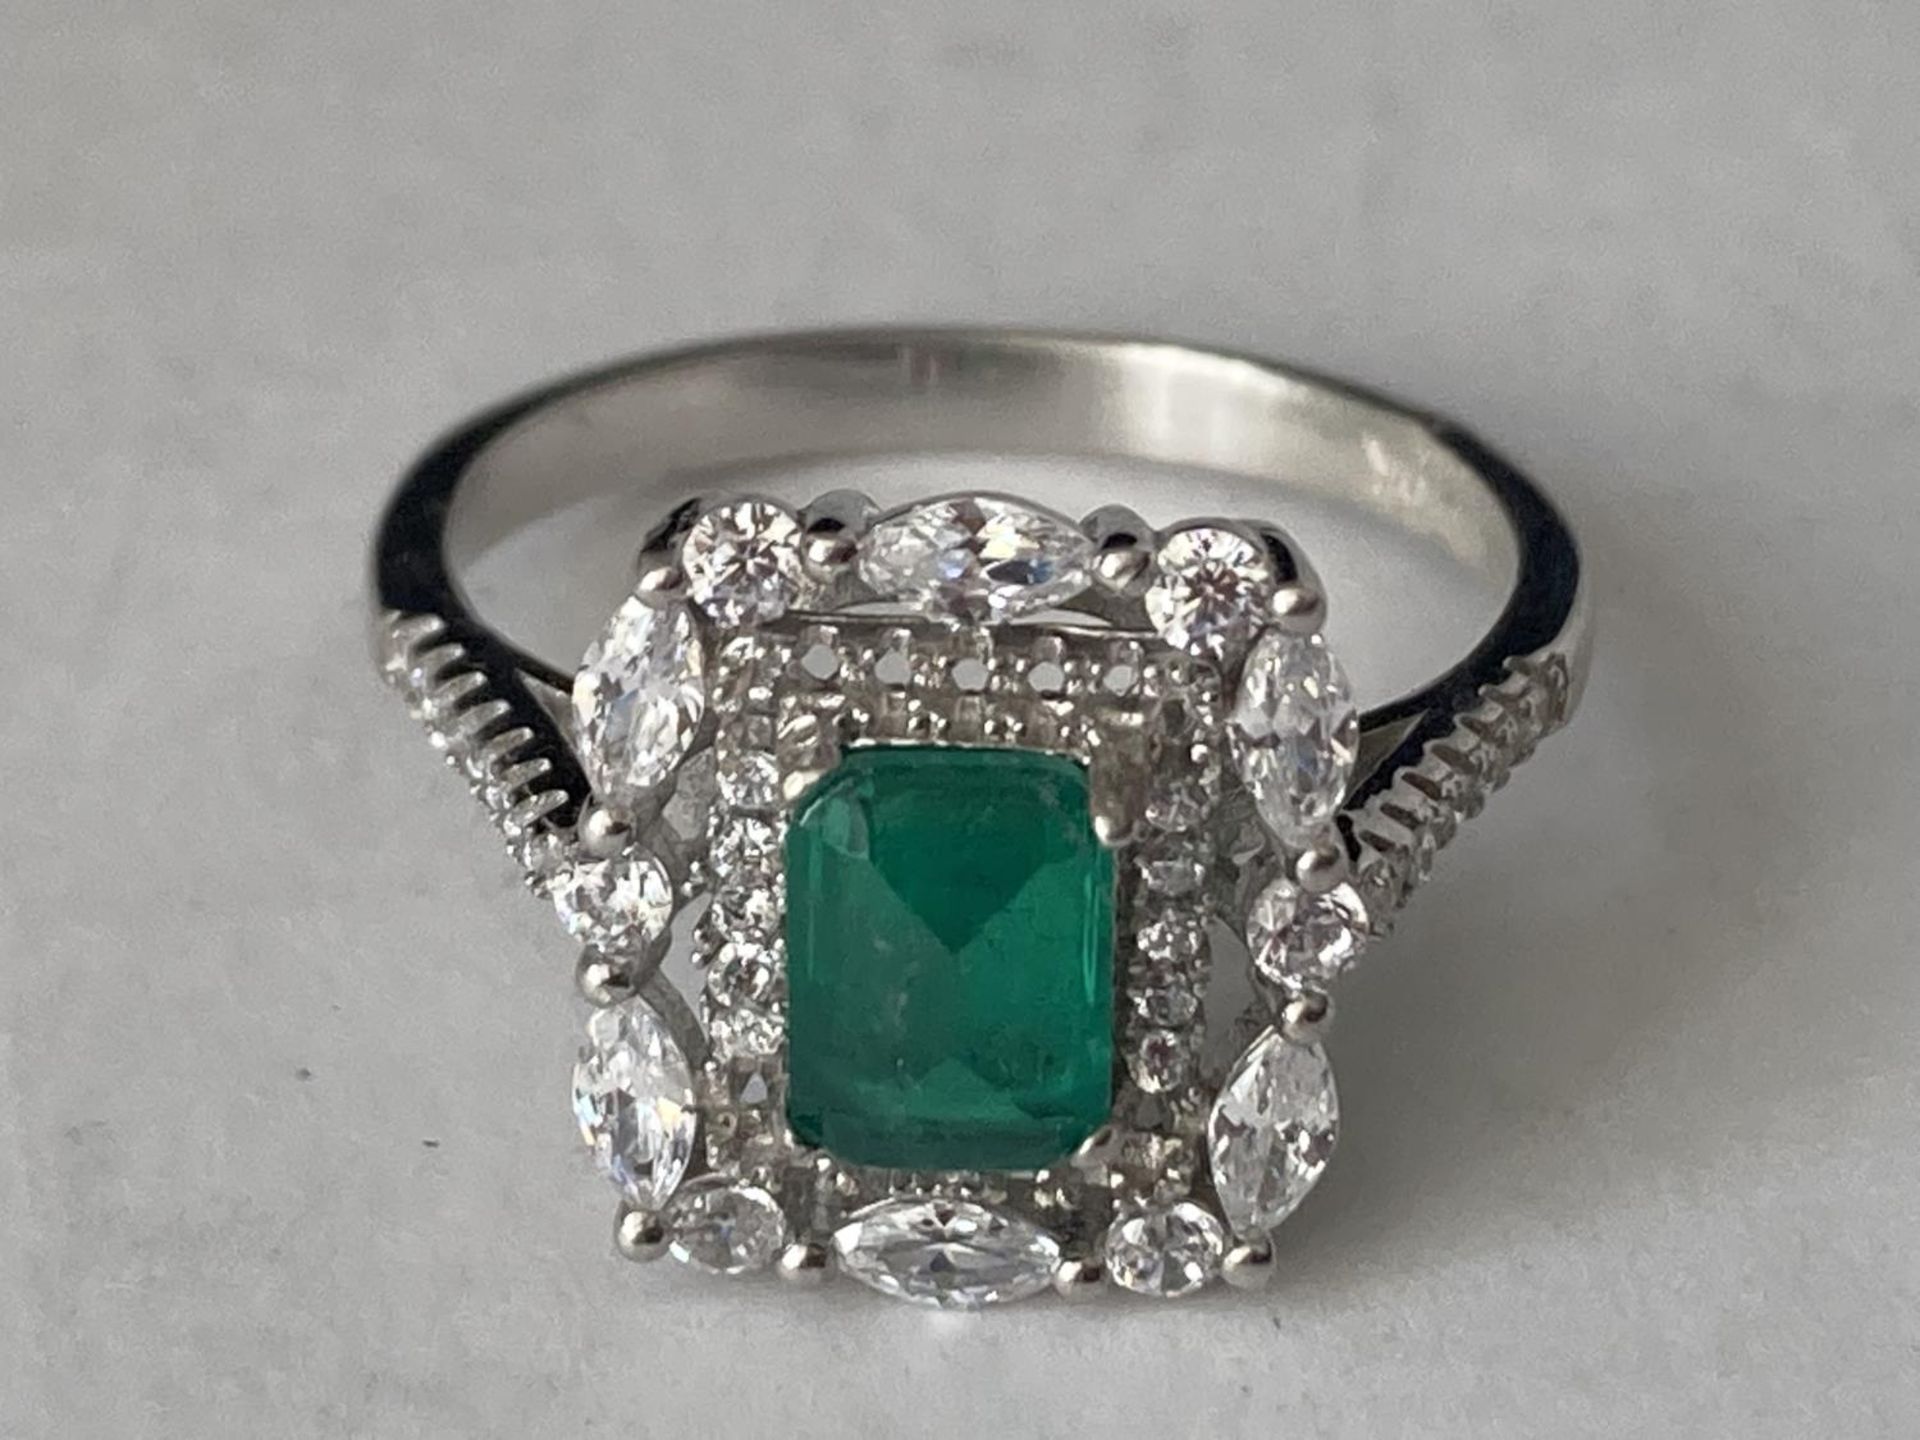 A WHITE METAL RING WITH A CENTRE RECTANGULAR LABORATORY GROWN EMERALD SURROUNDED BY CLEAR STONES - Image 2 of 6